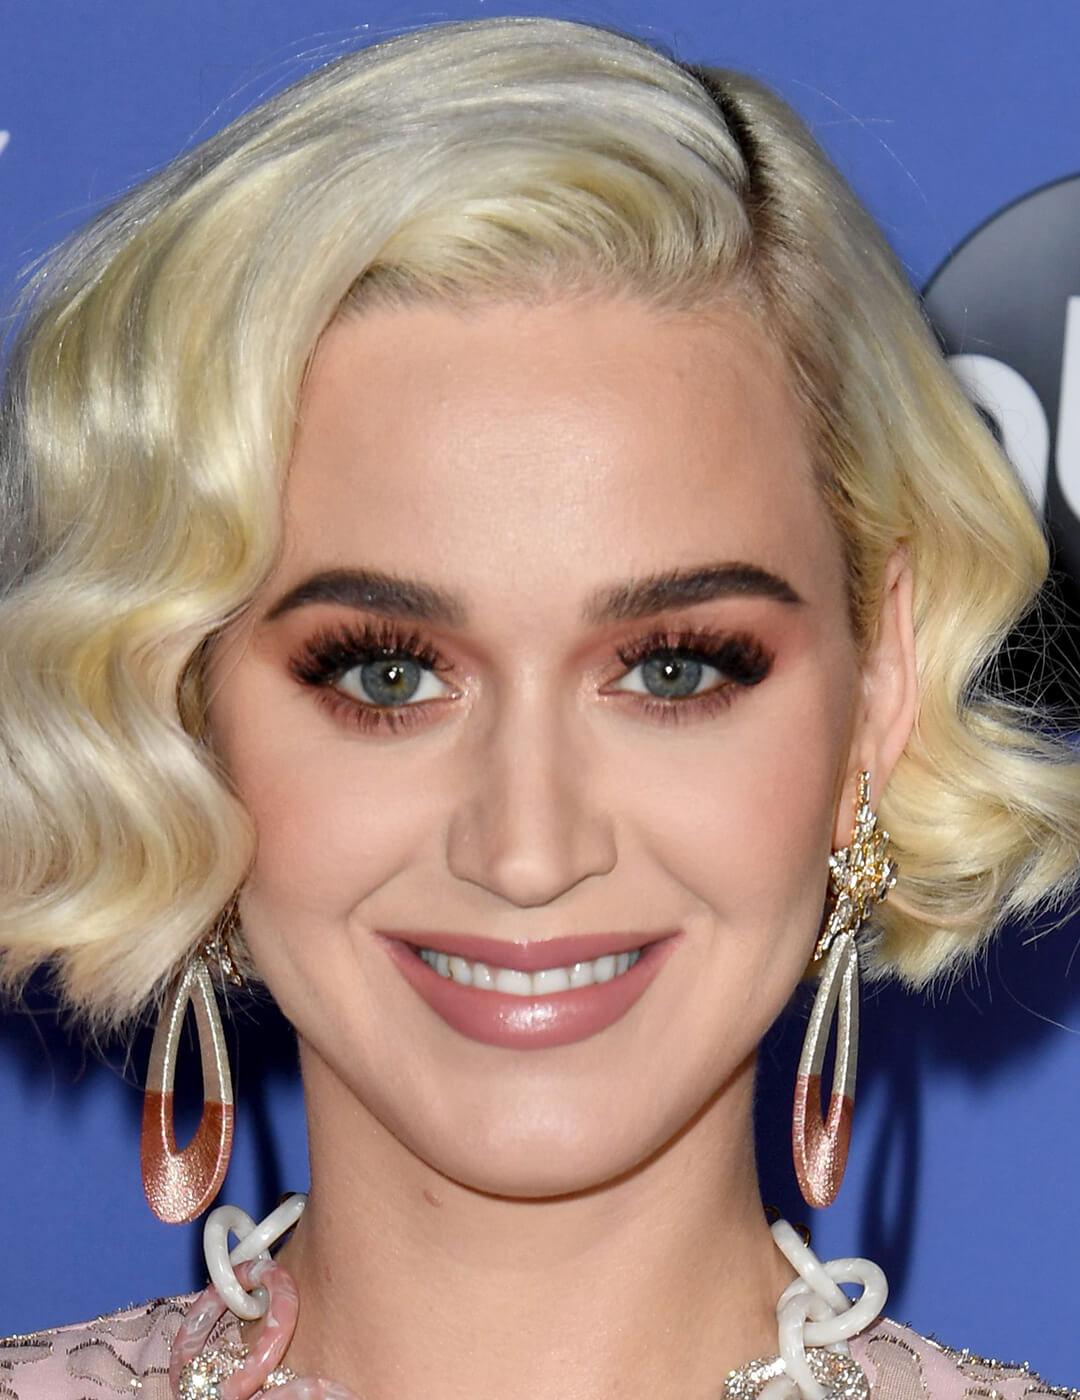 A photo of Katy Perry with an out-to-there lashes and thick black liner on the top lash line